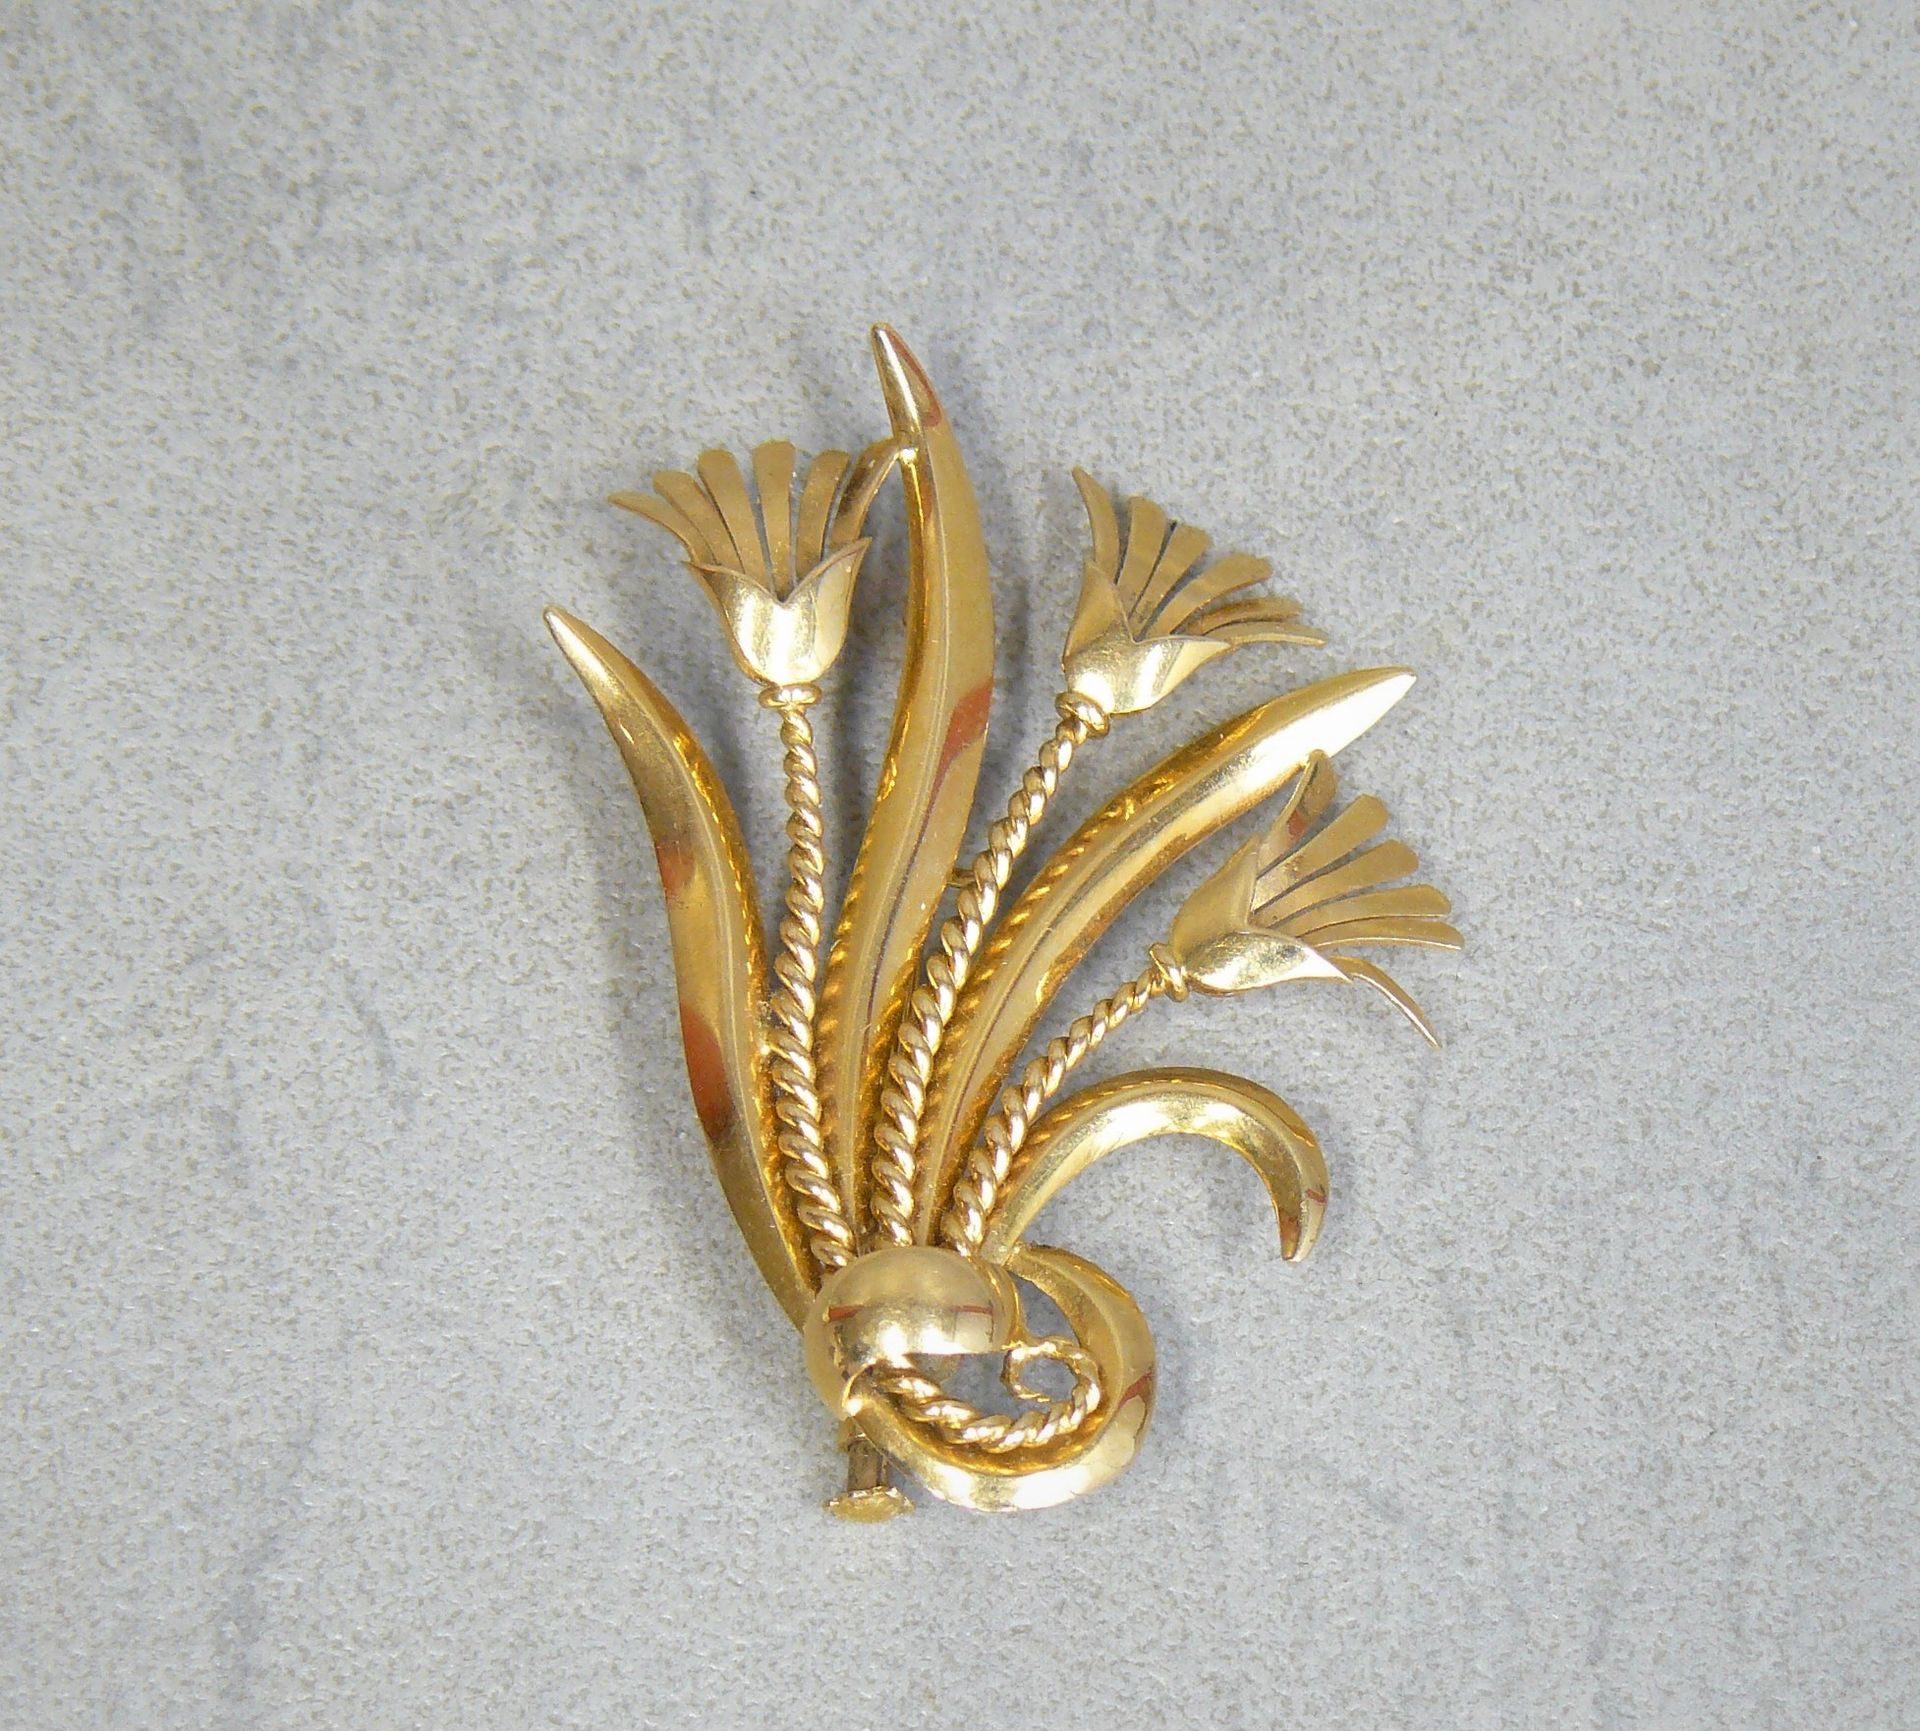 Null Gold sheaf brooch (eagle) with three flowers - weight 7,90g